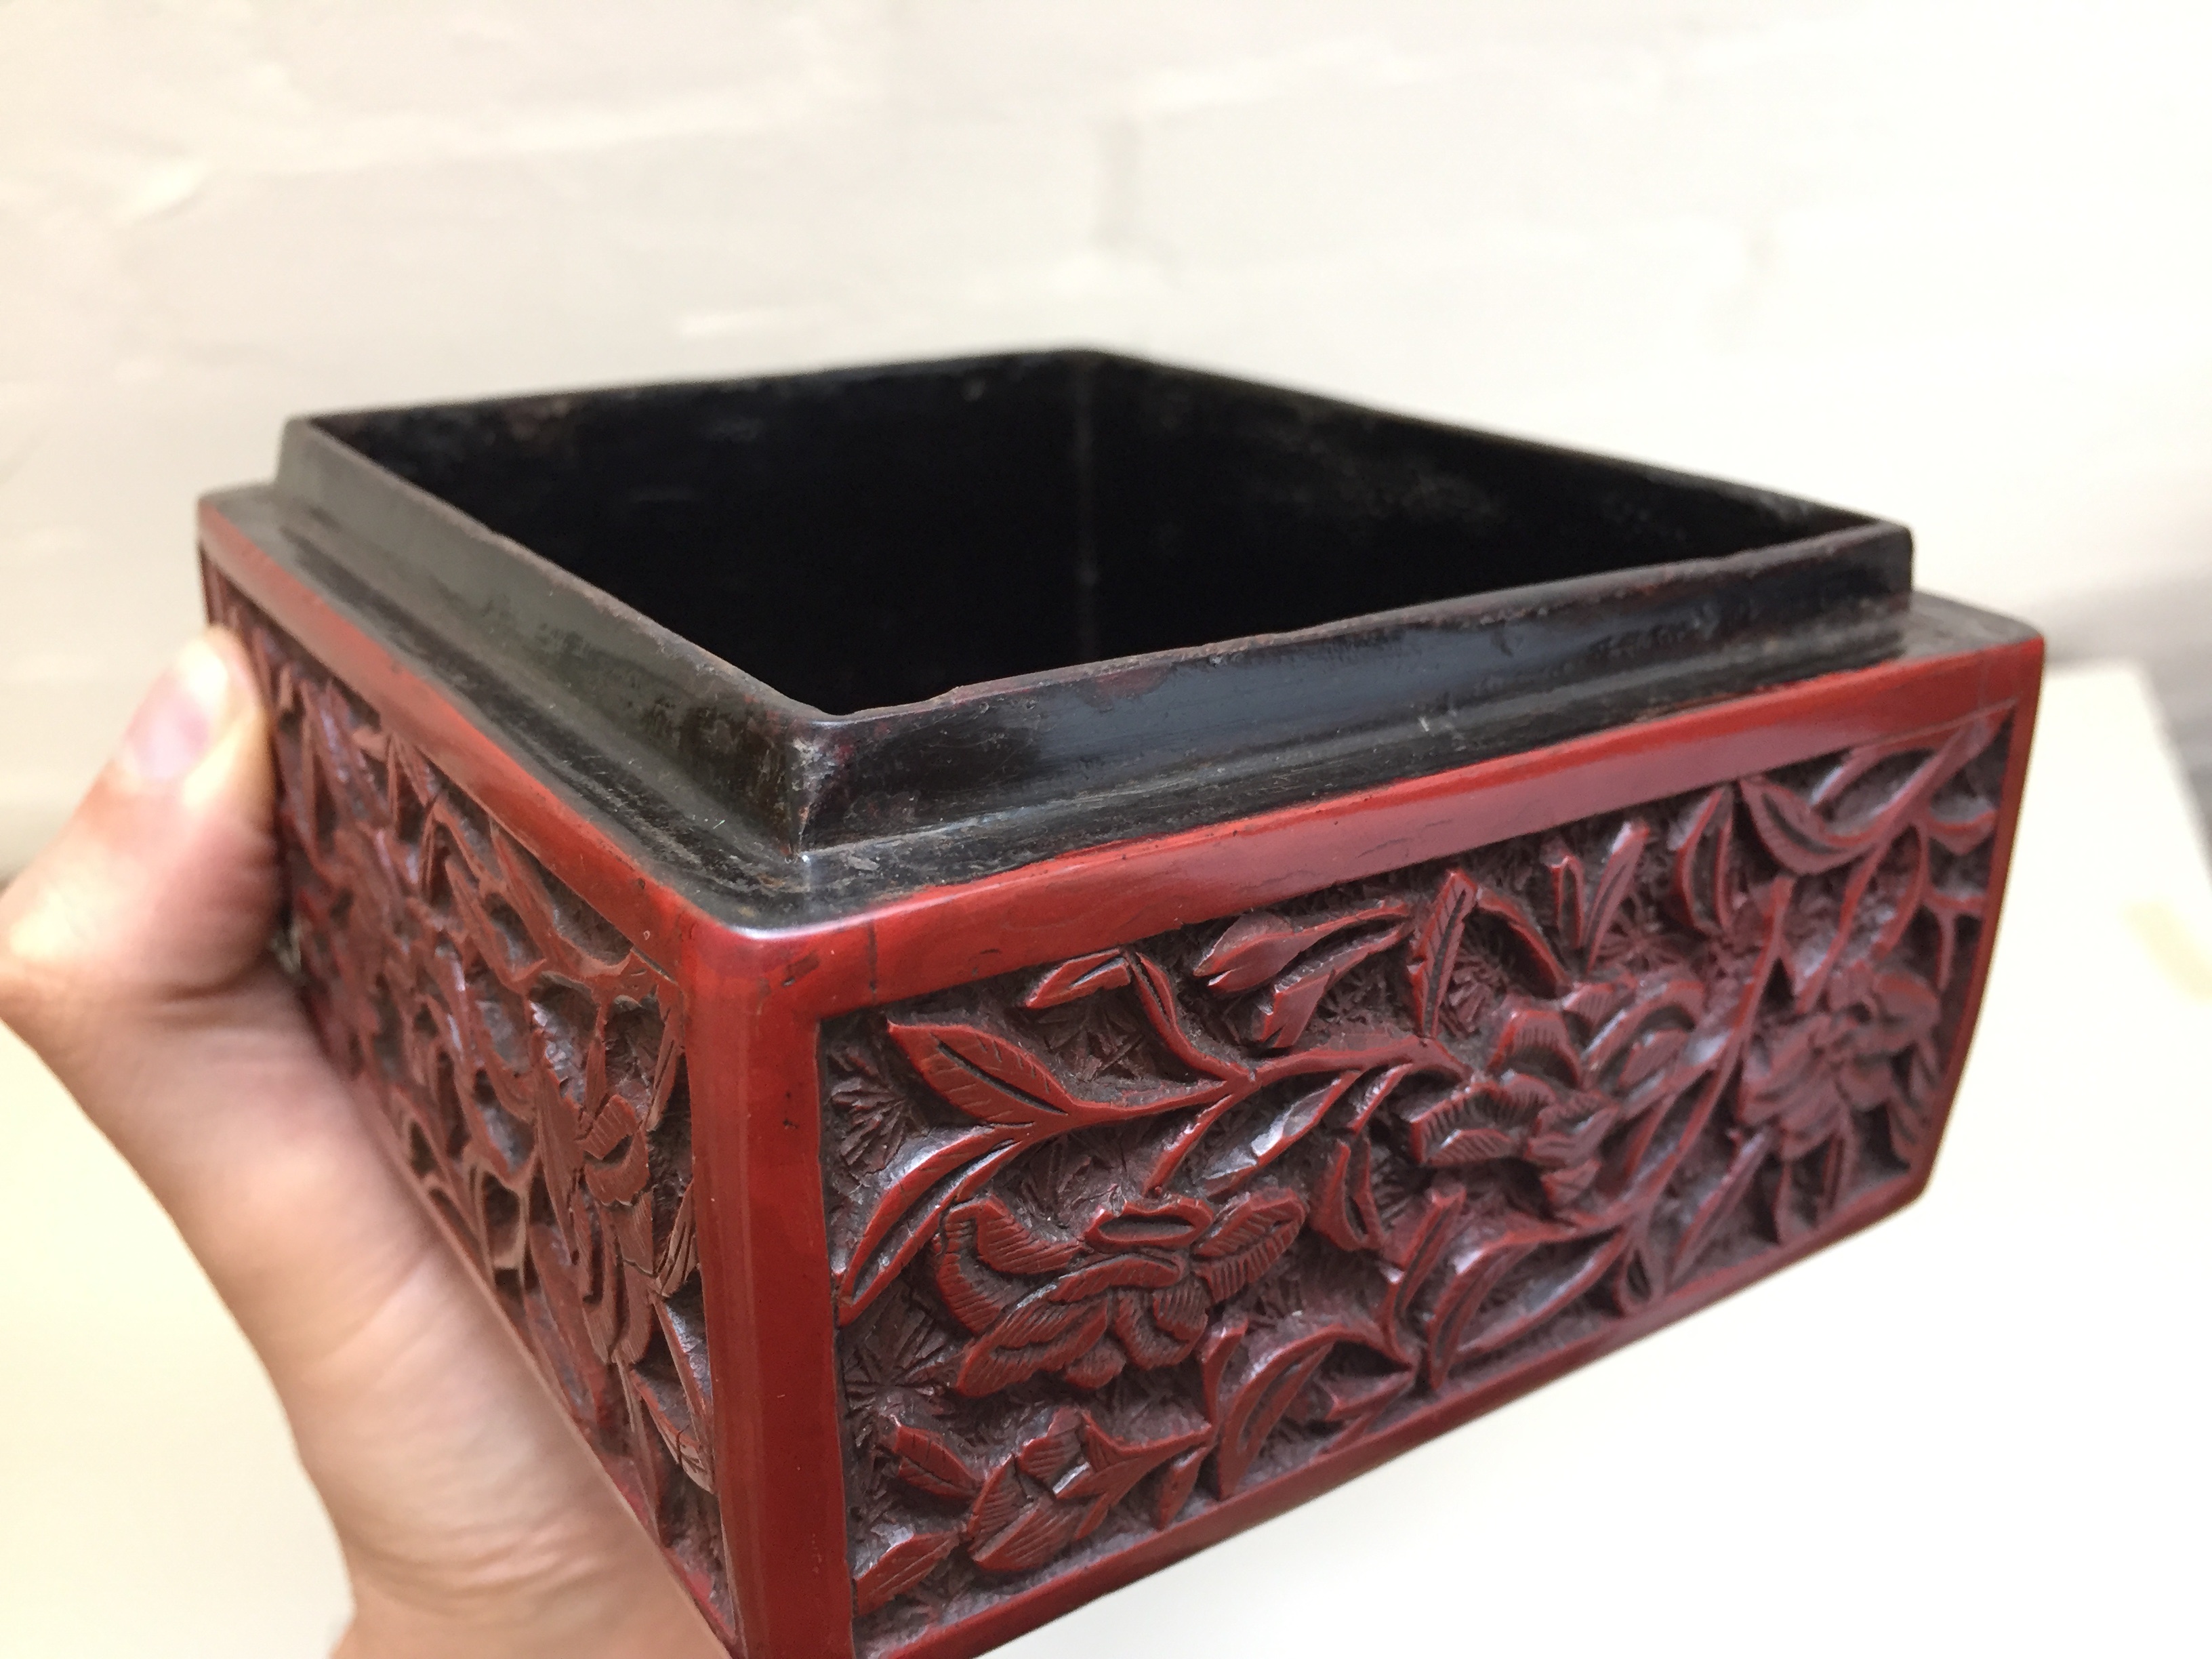 A CHINESE CINNABAR LACQUER 'MUSICIAN' BOX AND COVER 晚明 剔紅圖高士行樂圖紋蓋盒 - Image 16 of 20